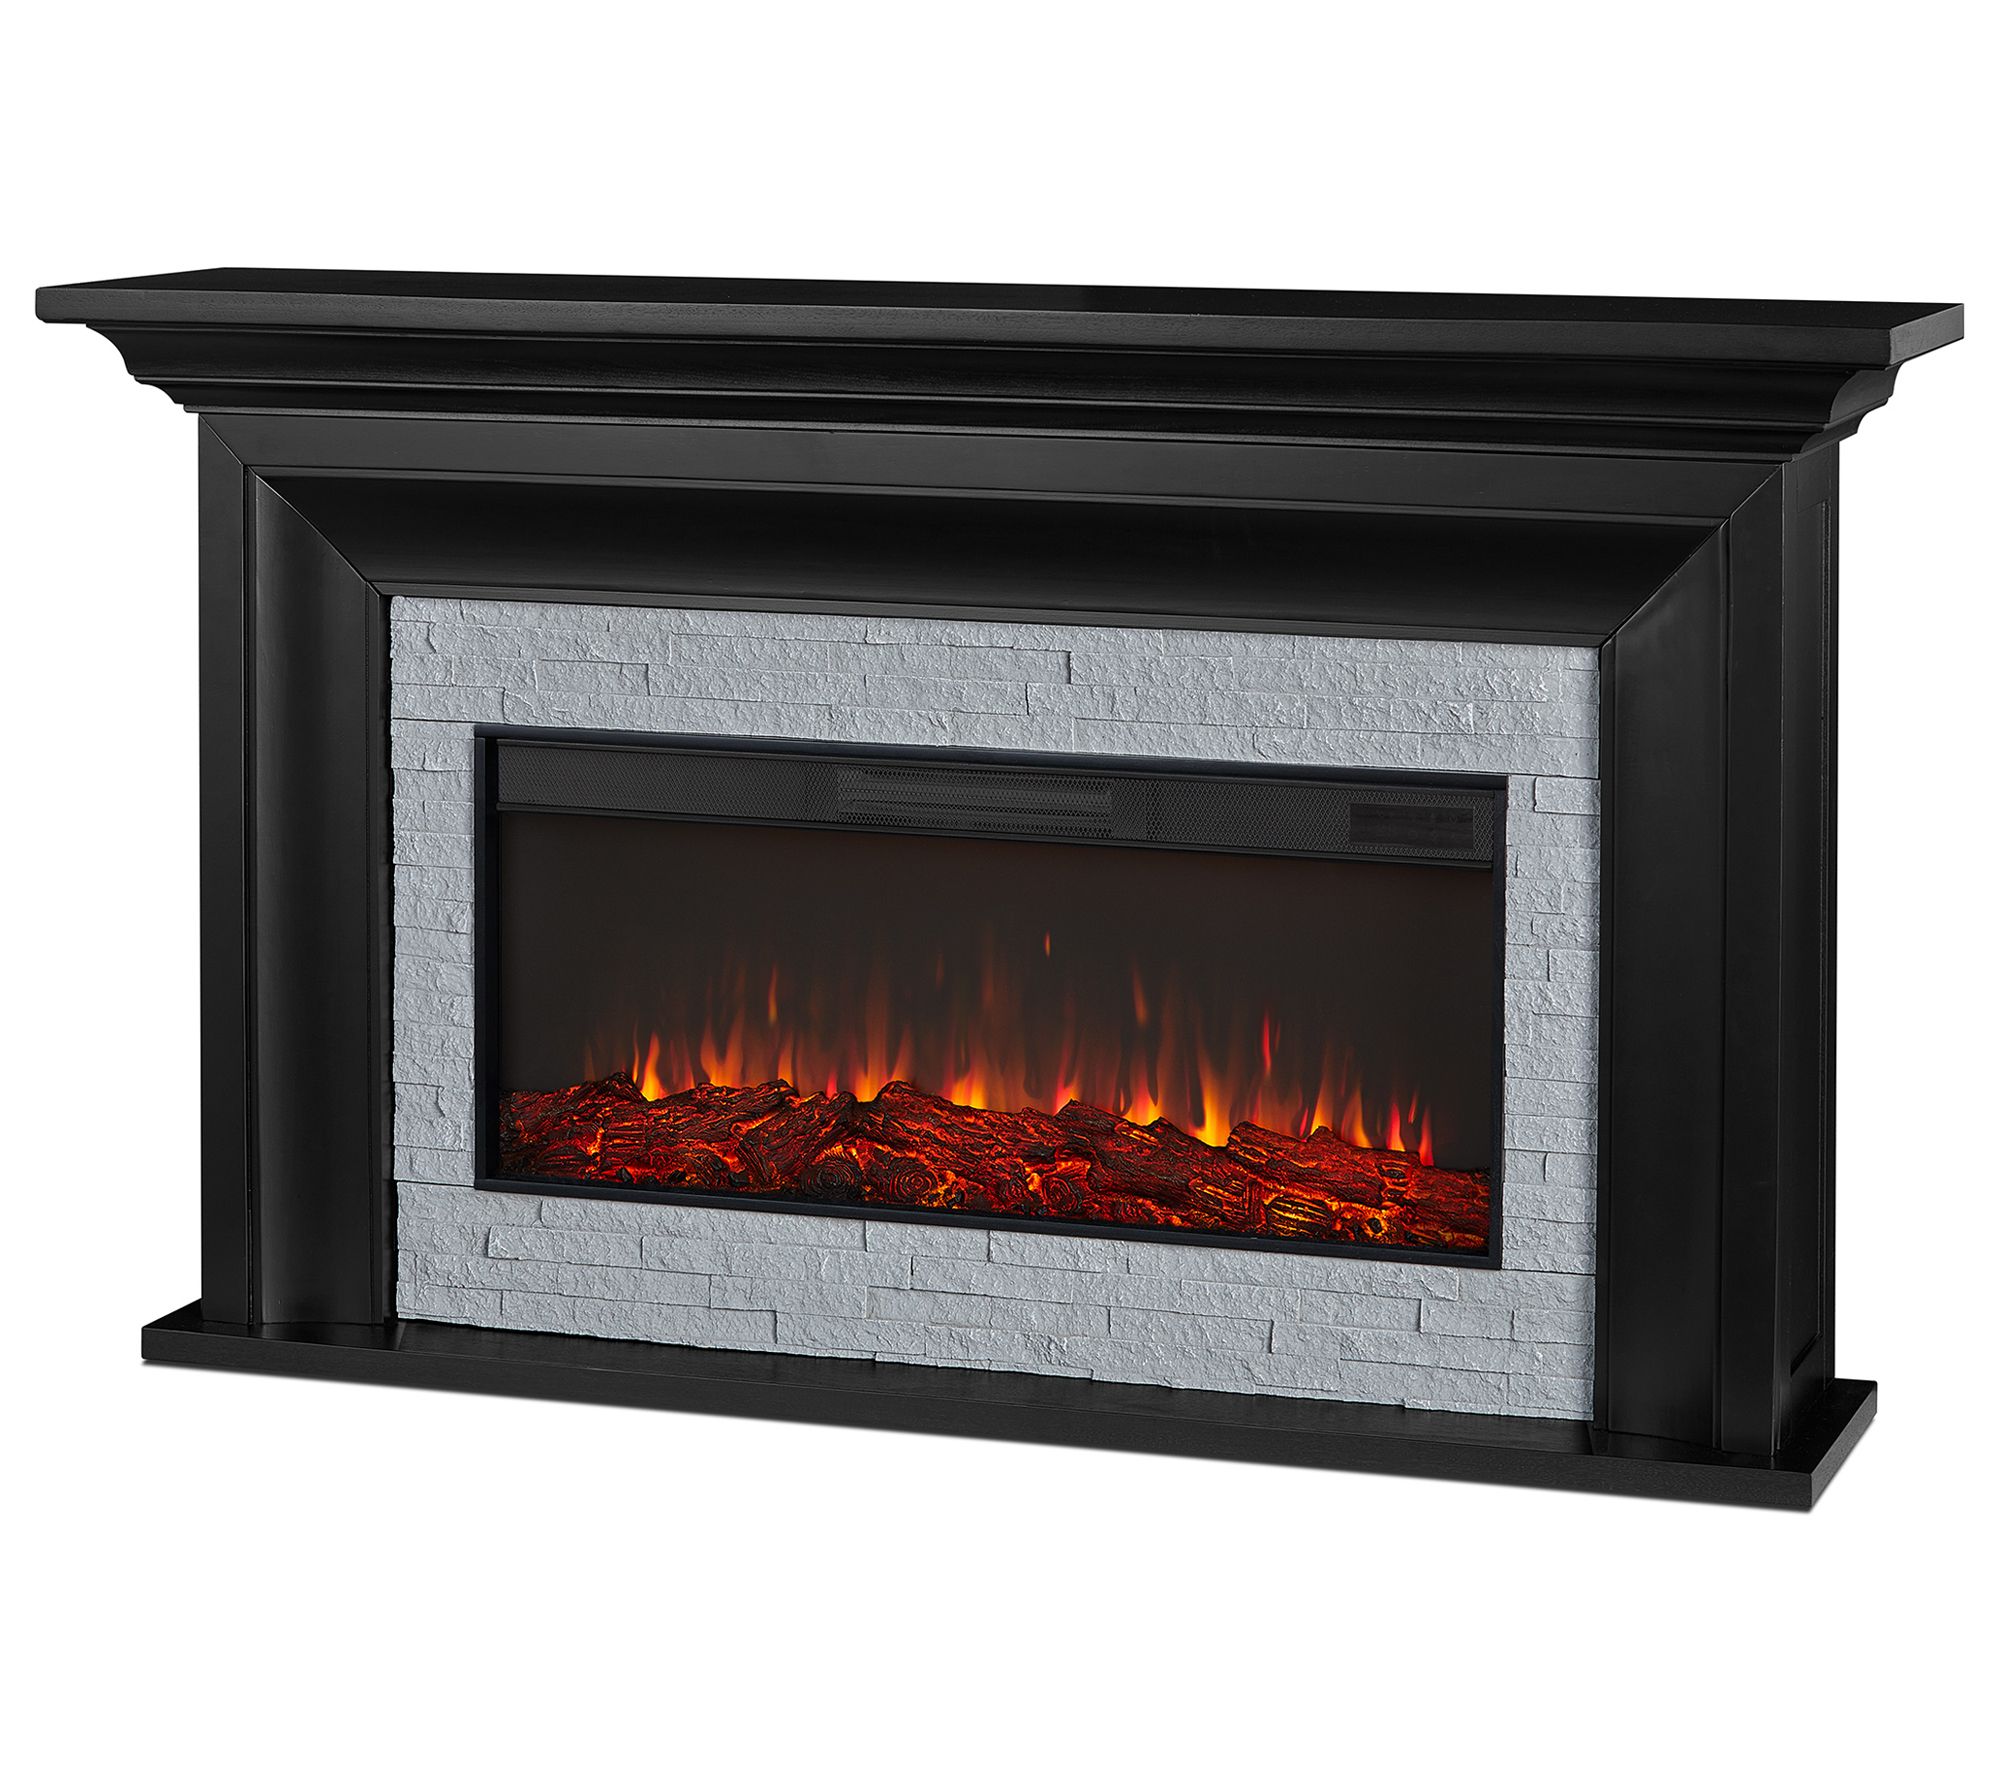 Real Flame Sonia Landscape Electric Fireplace - QVC.com